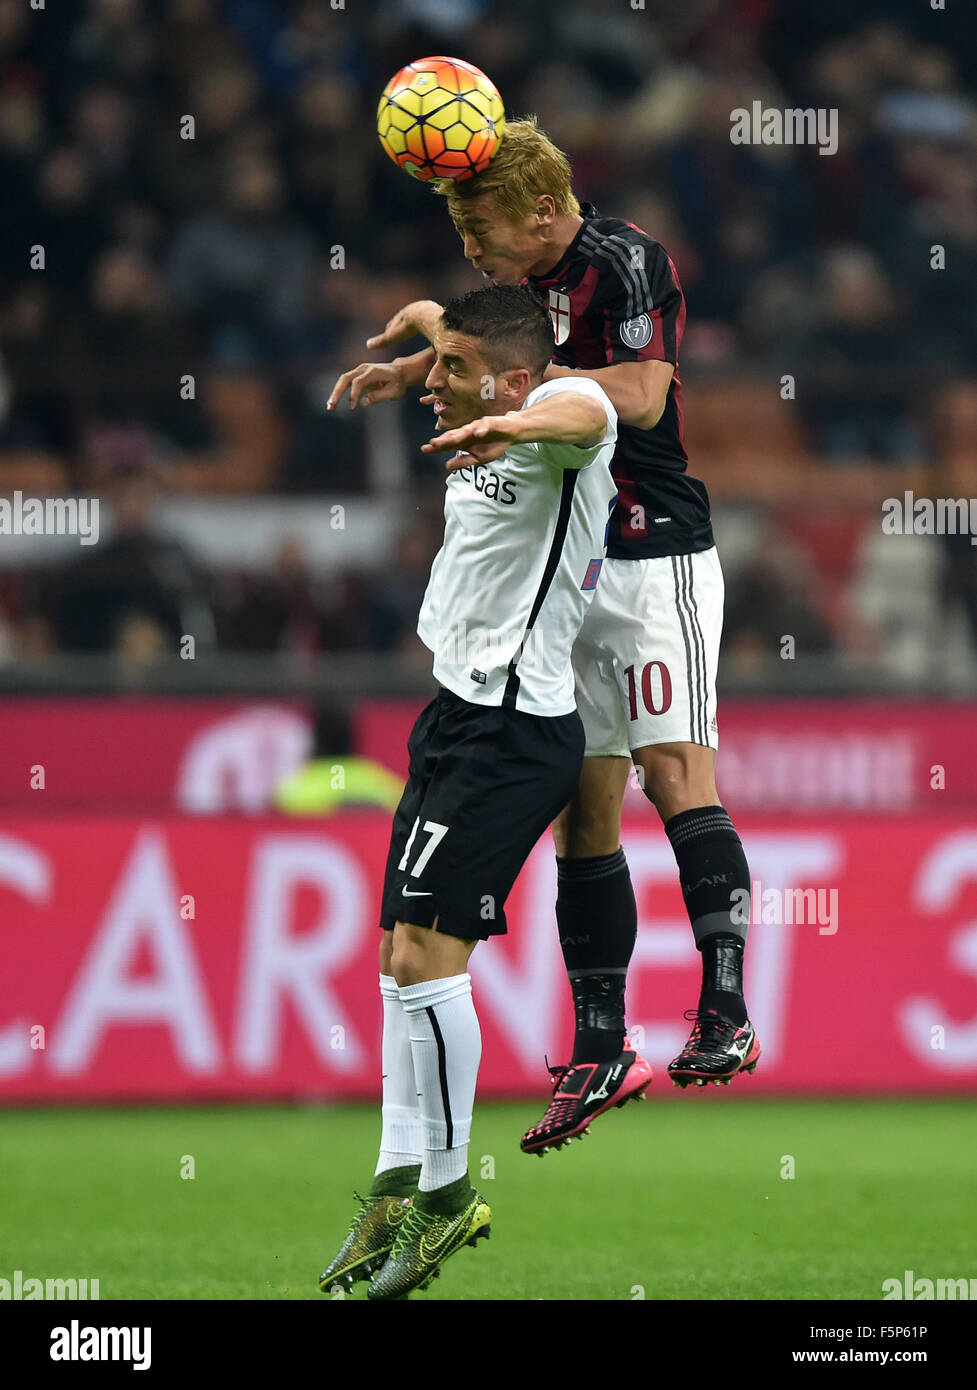 Milano, Italy. 7th Nov, 2015. Keisuke Honda (R) of AC Milan vies with Carlos Carmona of Atalanta during their 2015-16 season Serie A match in Milano, Italy, on Nov. 7, 2015. The match ended with 0-0 draw. Credit:  Alberto Lingria/Xinhua/Alamy Live News Stock Photo